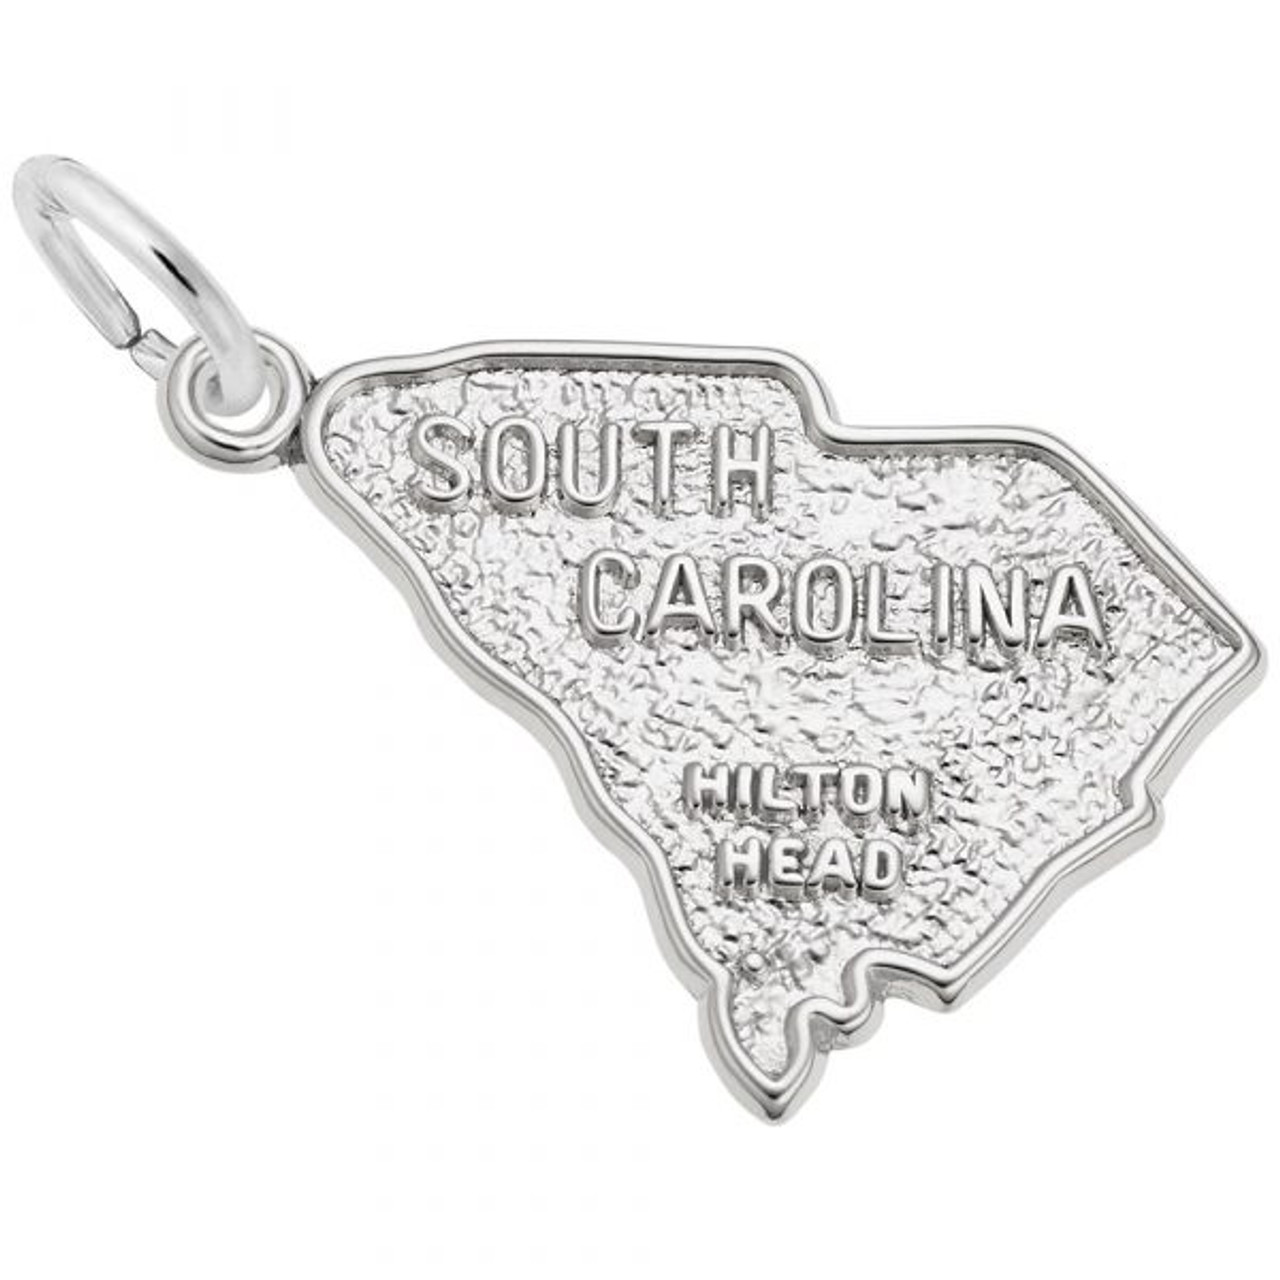 Hilton Head South Carolina Map Silver Charm - Sterling Silver and 14k White Gold